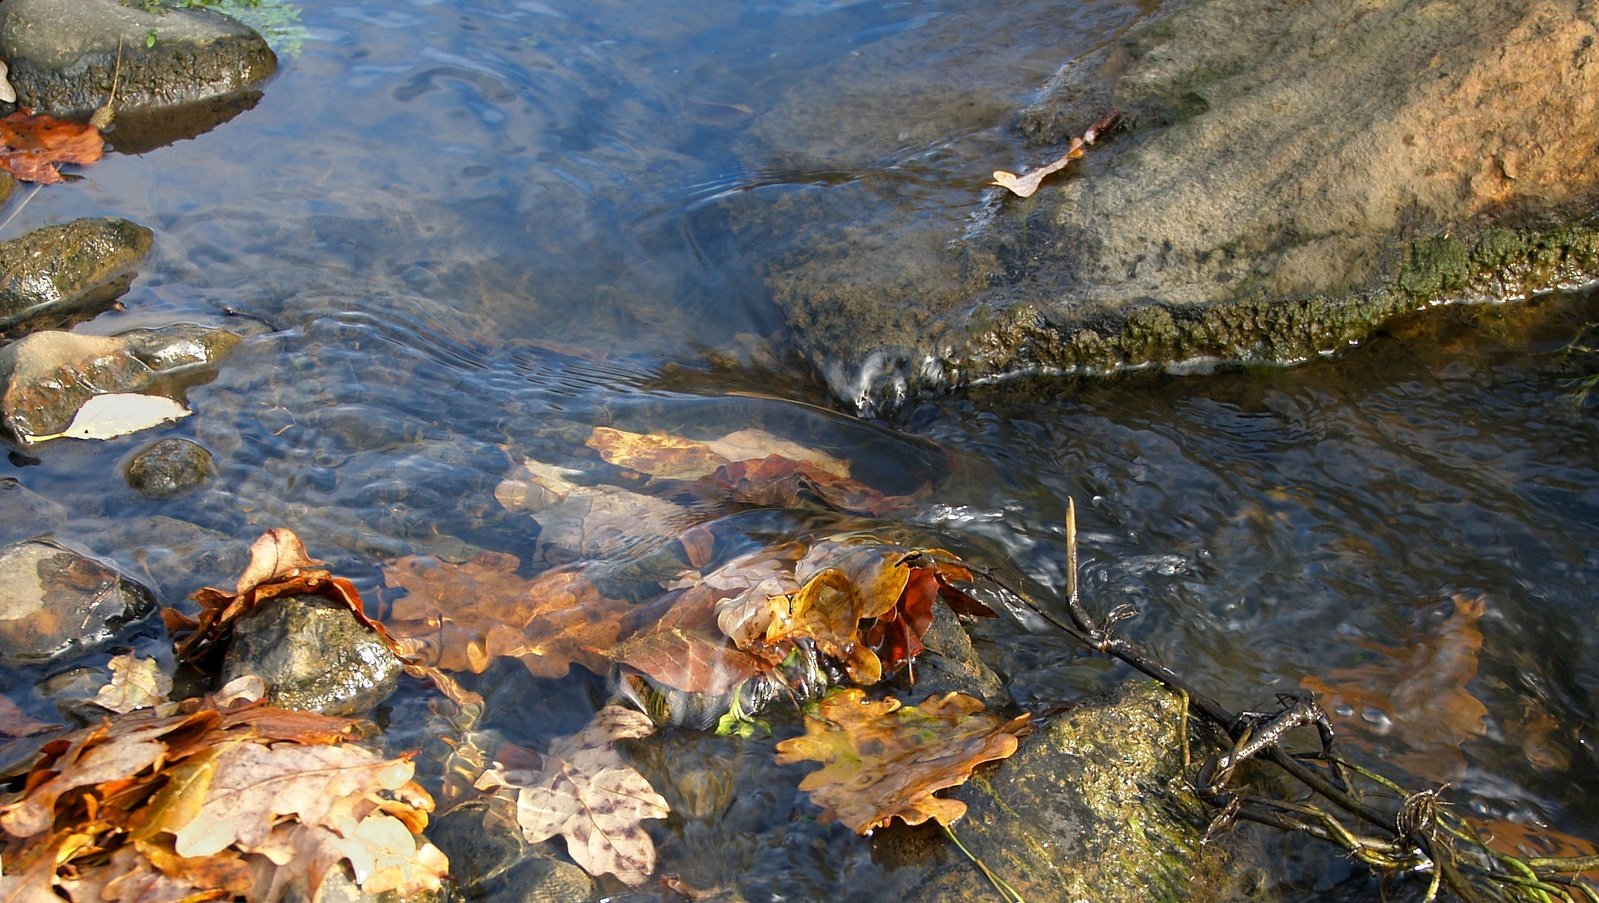 the stream is full of rocks and leaves